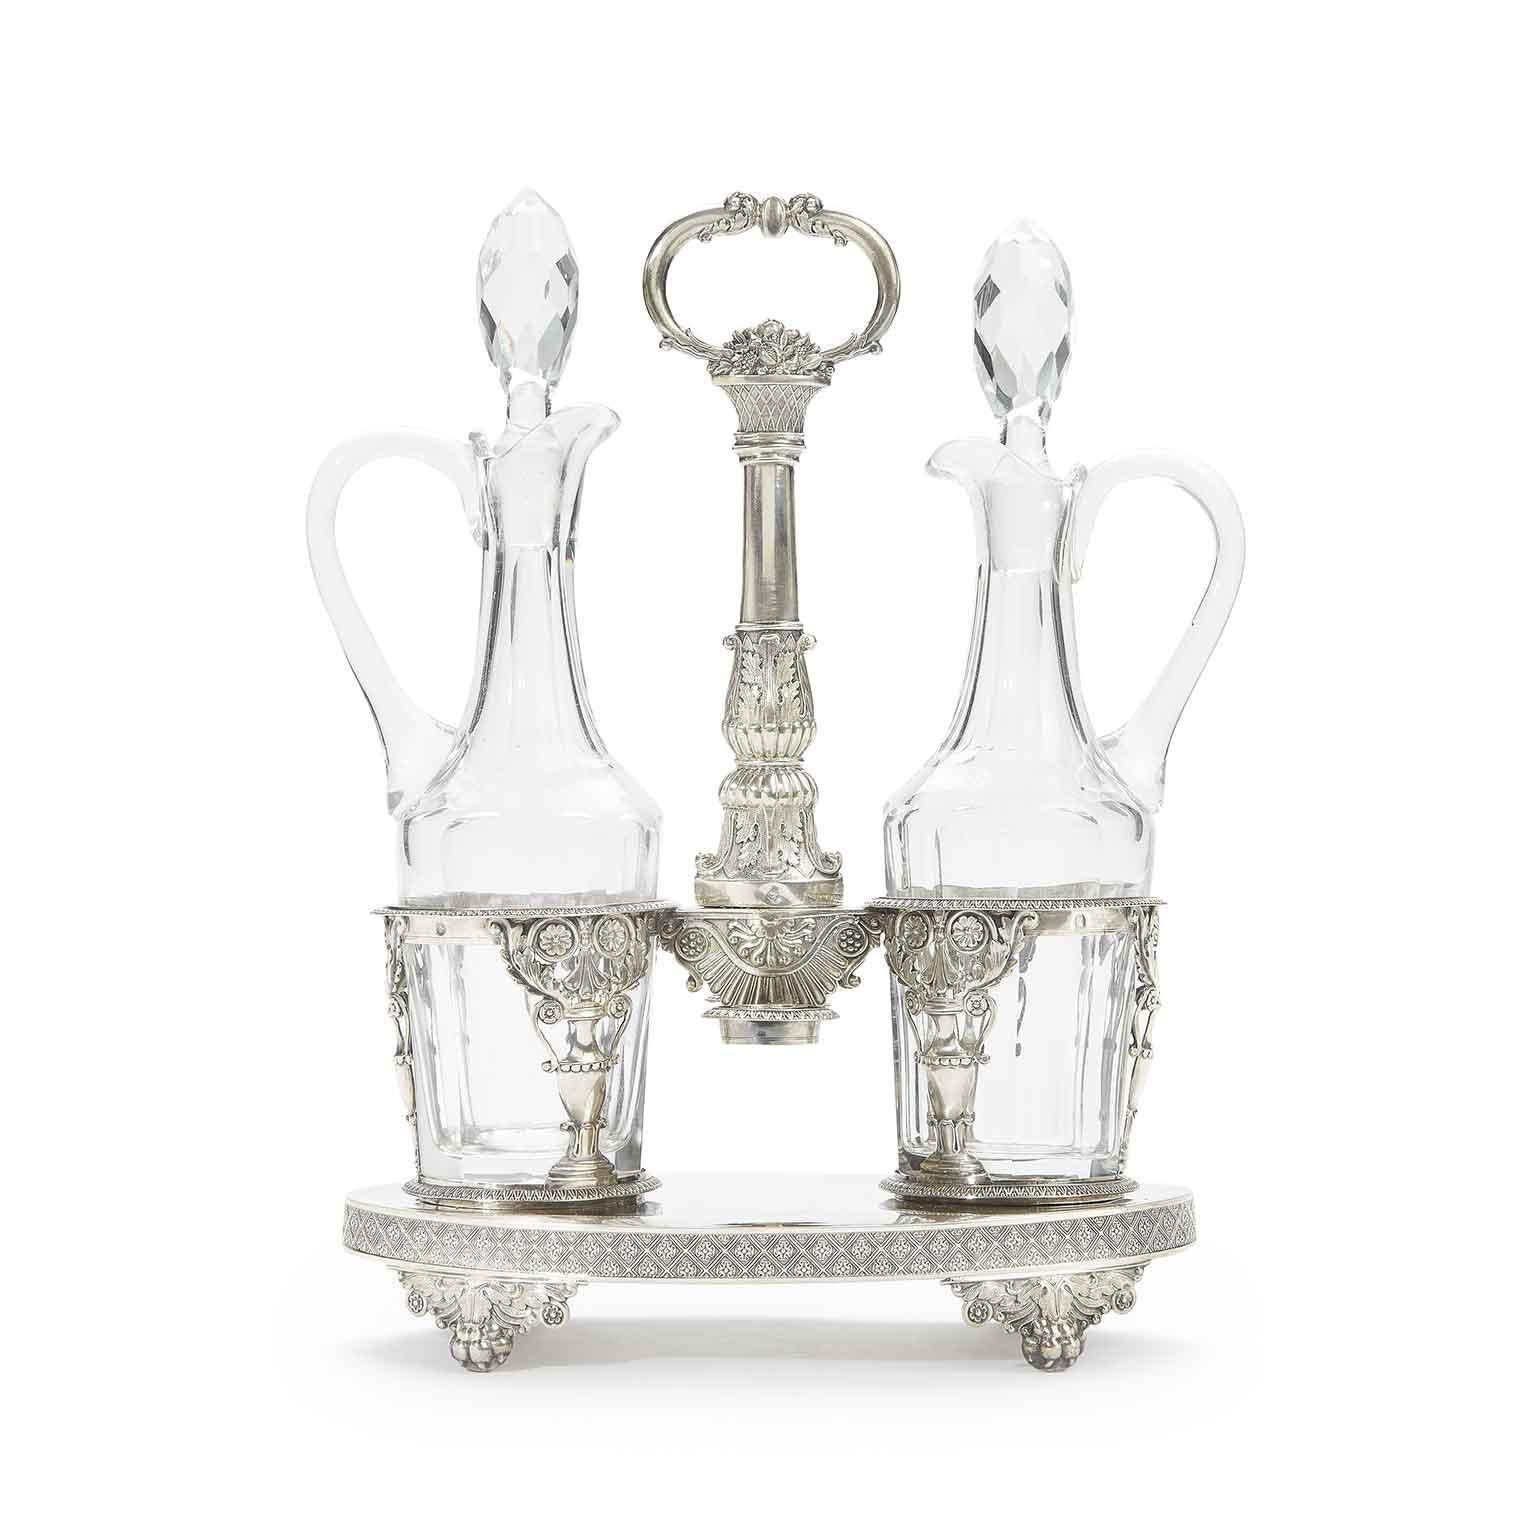 An antique sterling silver oil and vinegar cruet set, having a neoclassical style oval stand with hand-pierced and engraved flower and foliate decoration, with ring handle and a frame for two cut-glass cruet bottles probably later. Richly decorated